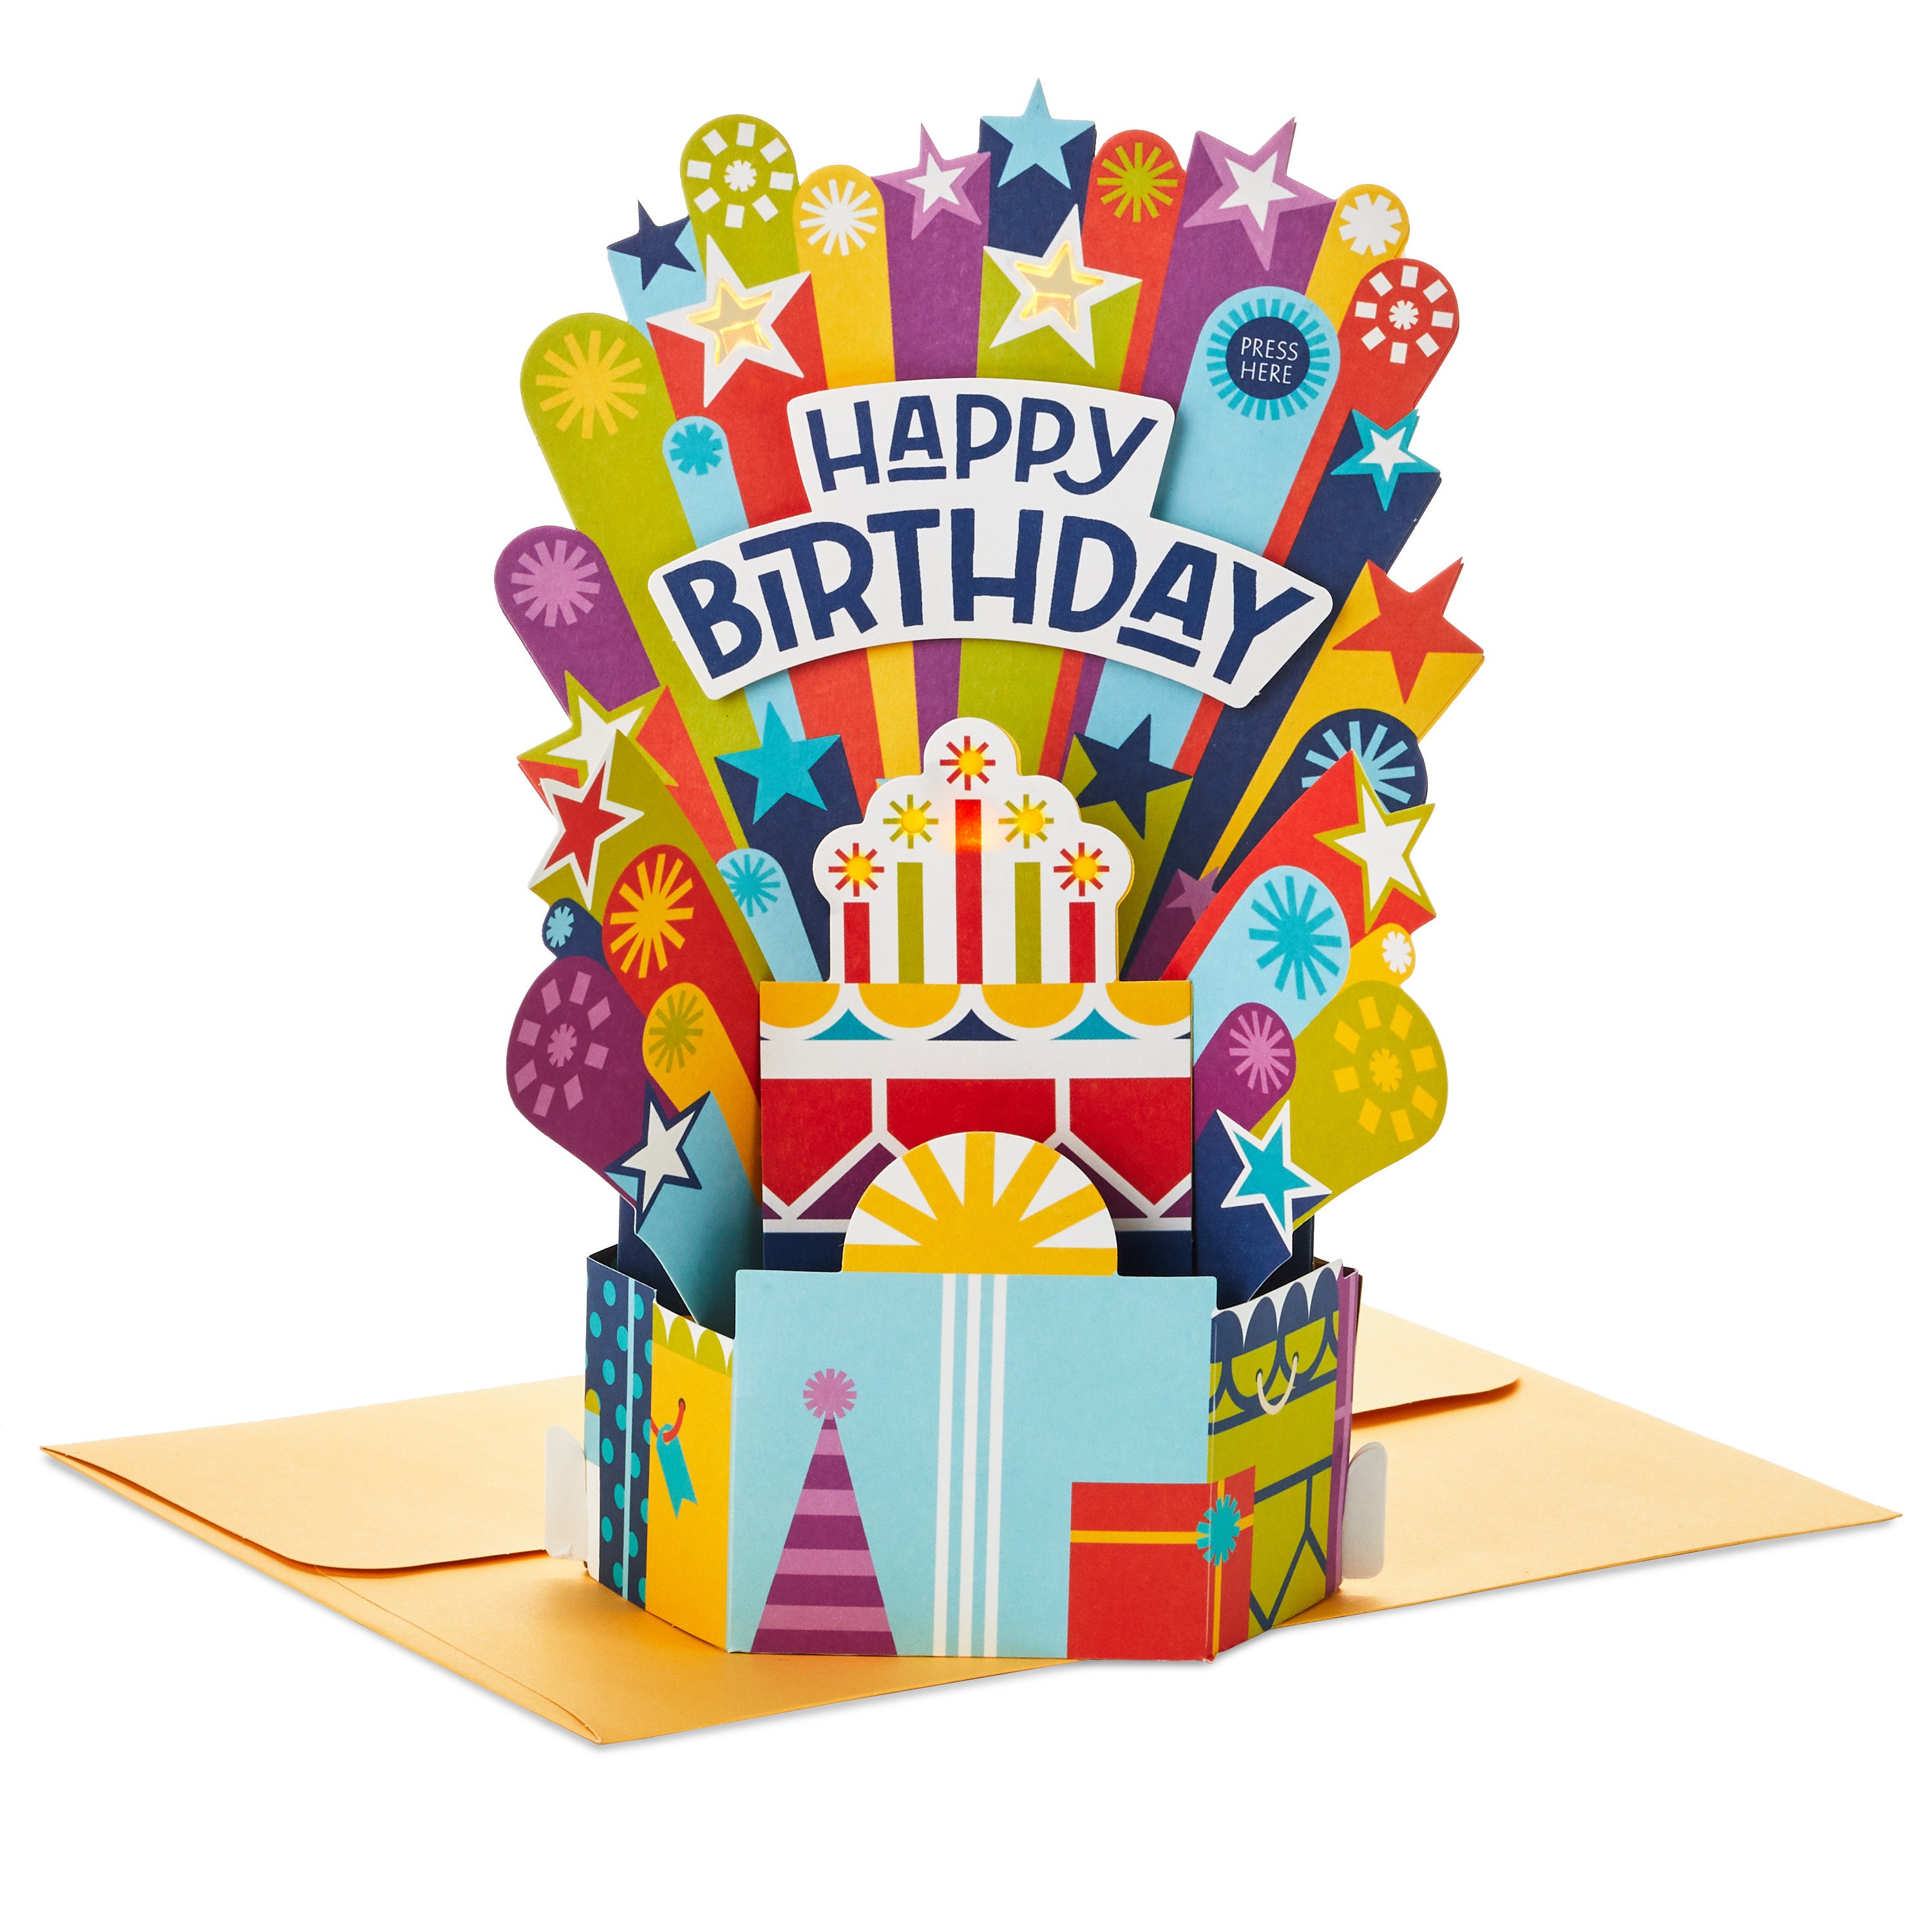 Paper Wonder Pop Up Birthday Card with Music (Birthday Cake, Happy by Pharell Williams)